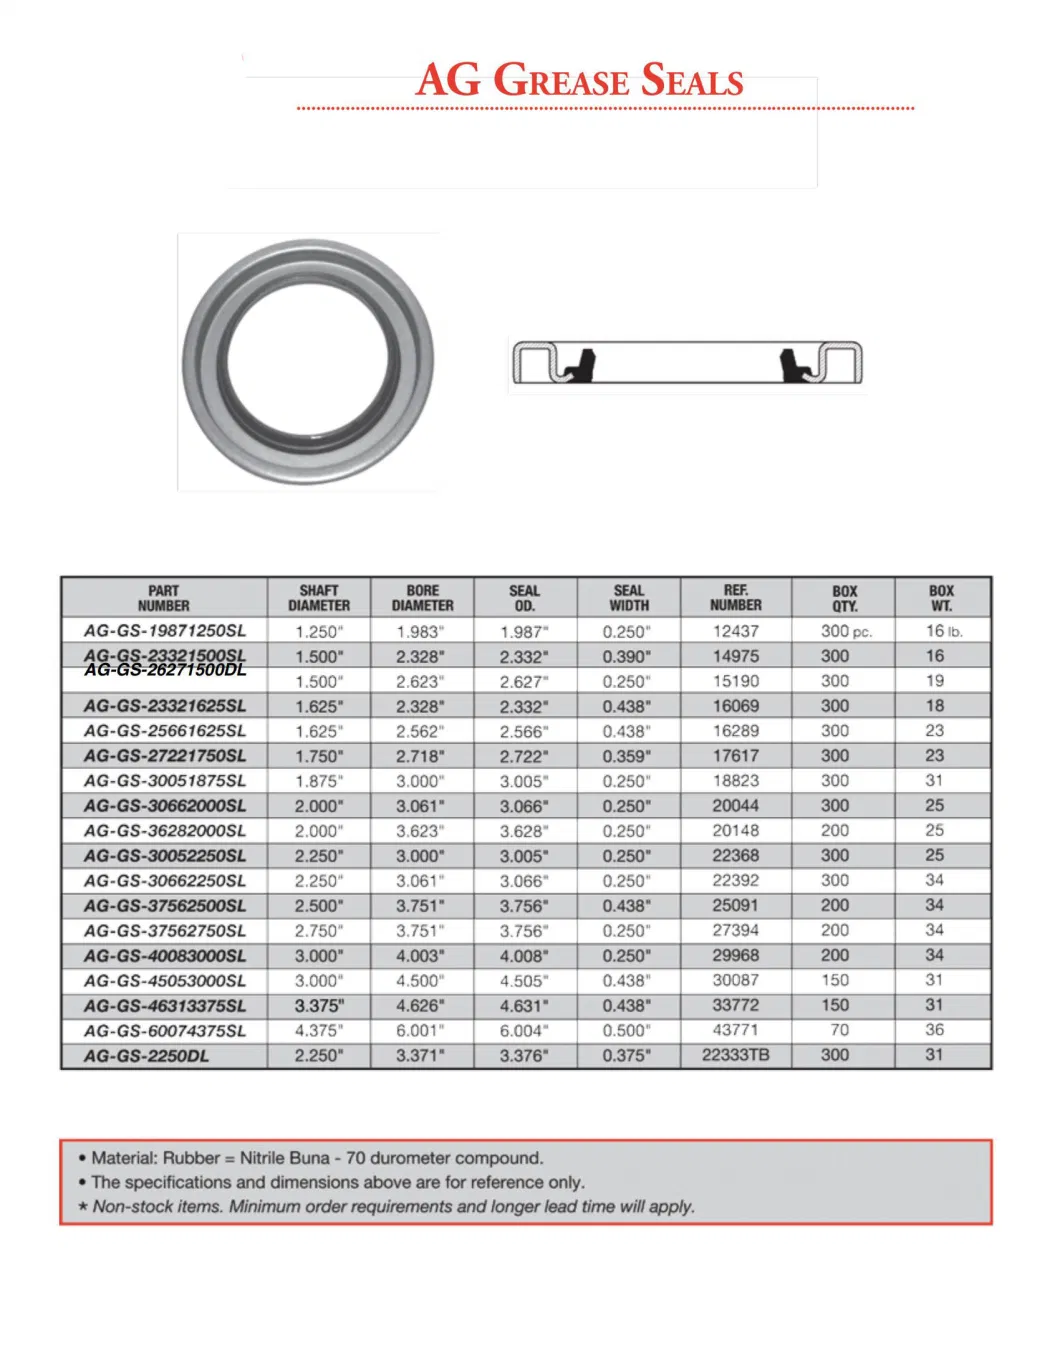 TRAILER BEARING KIT, 1 1/16&quot; STRAIGHT AXLE SPINDLE, L44649 INNER/OUTER BEARINGS, 44610 IN/OUT RACE (#12194TB)